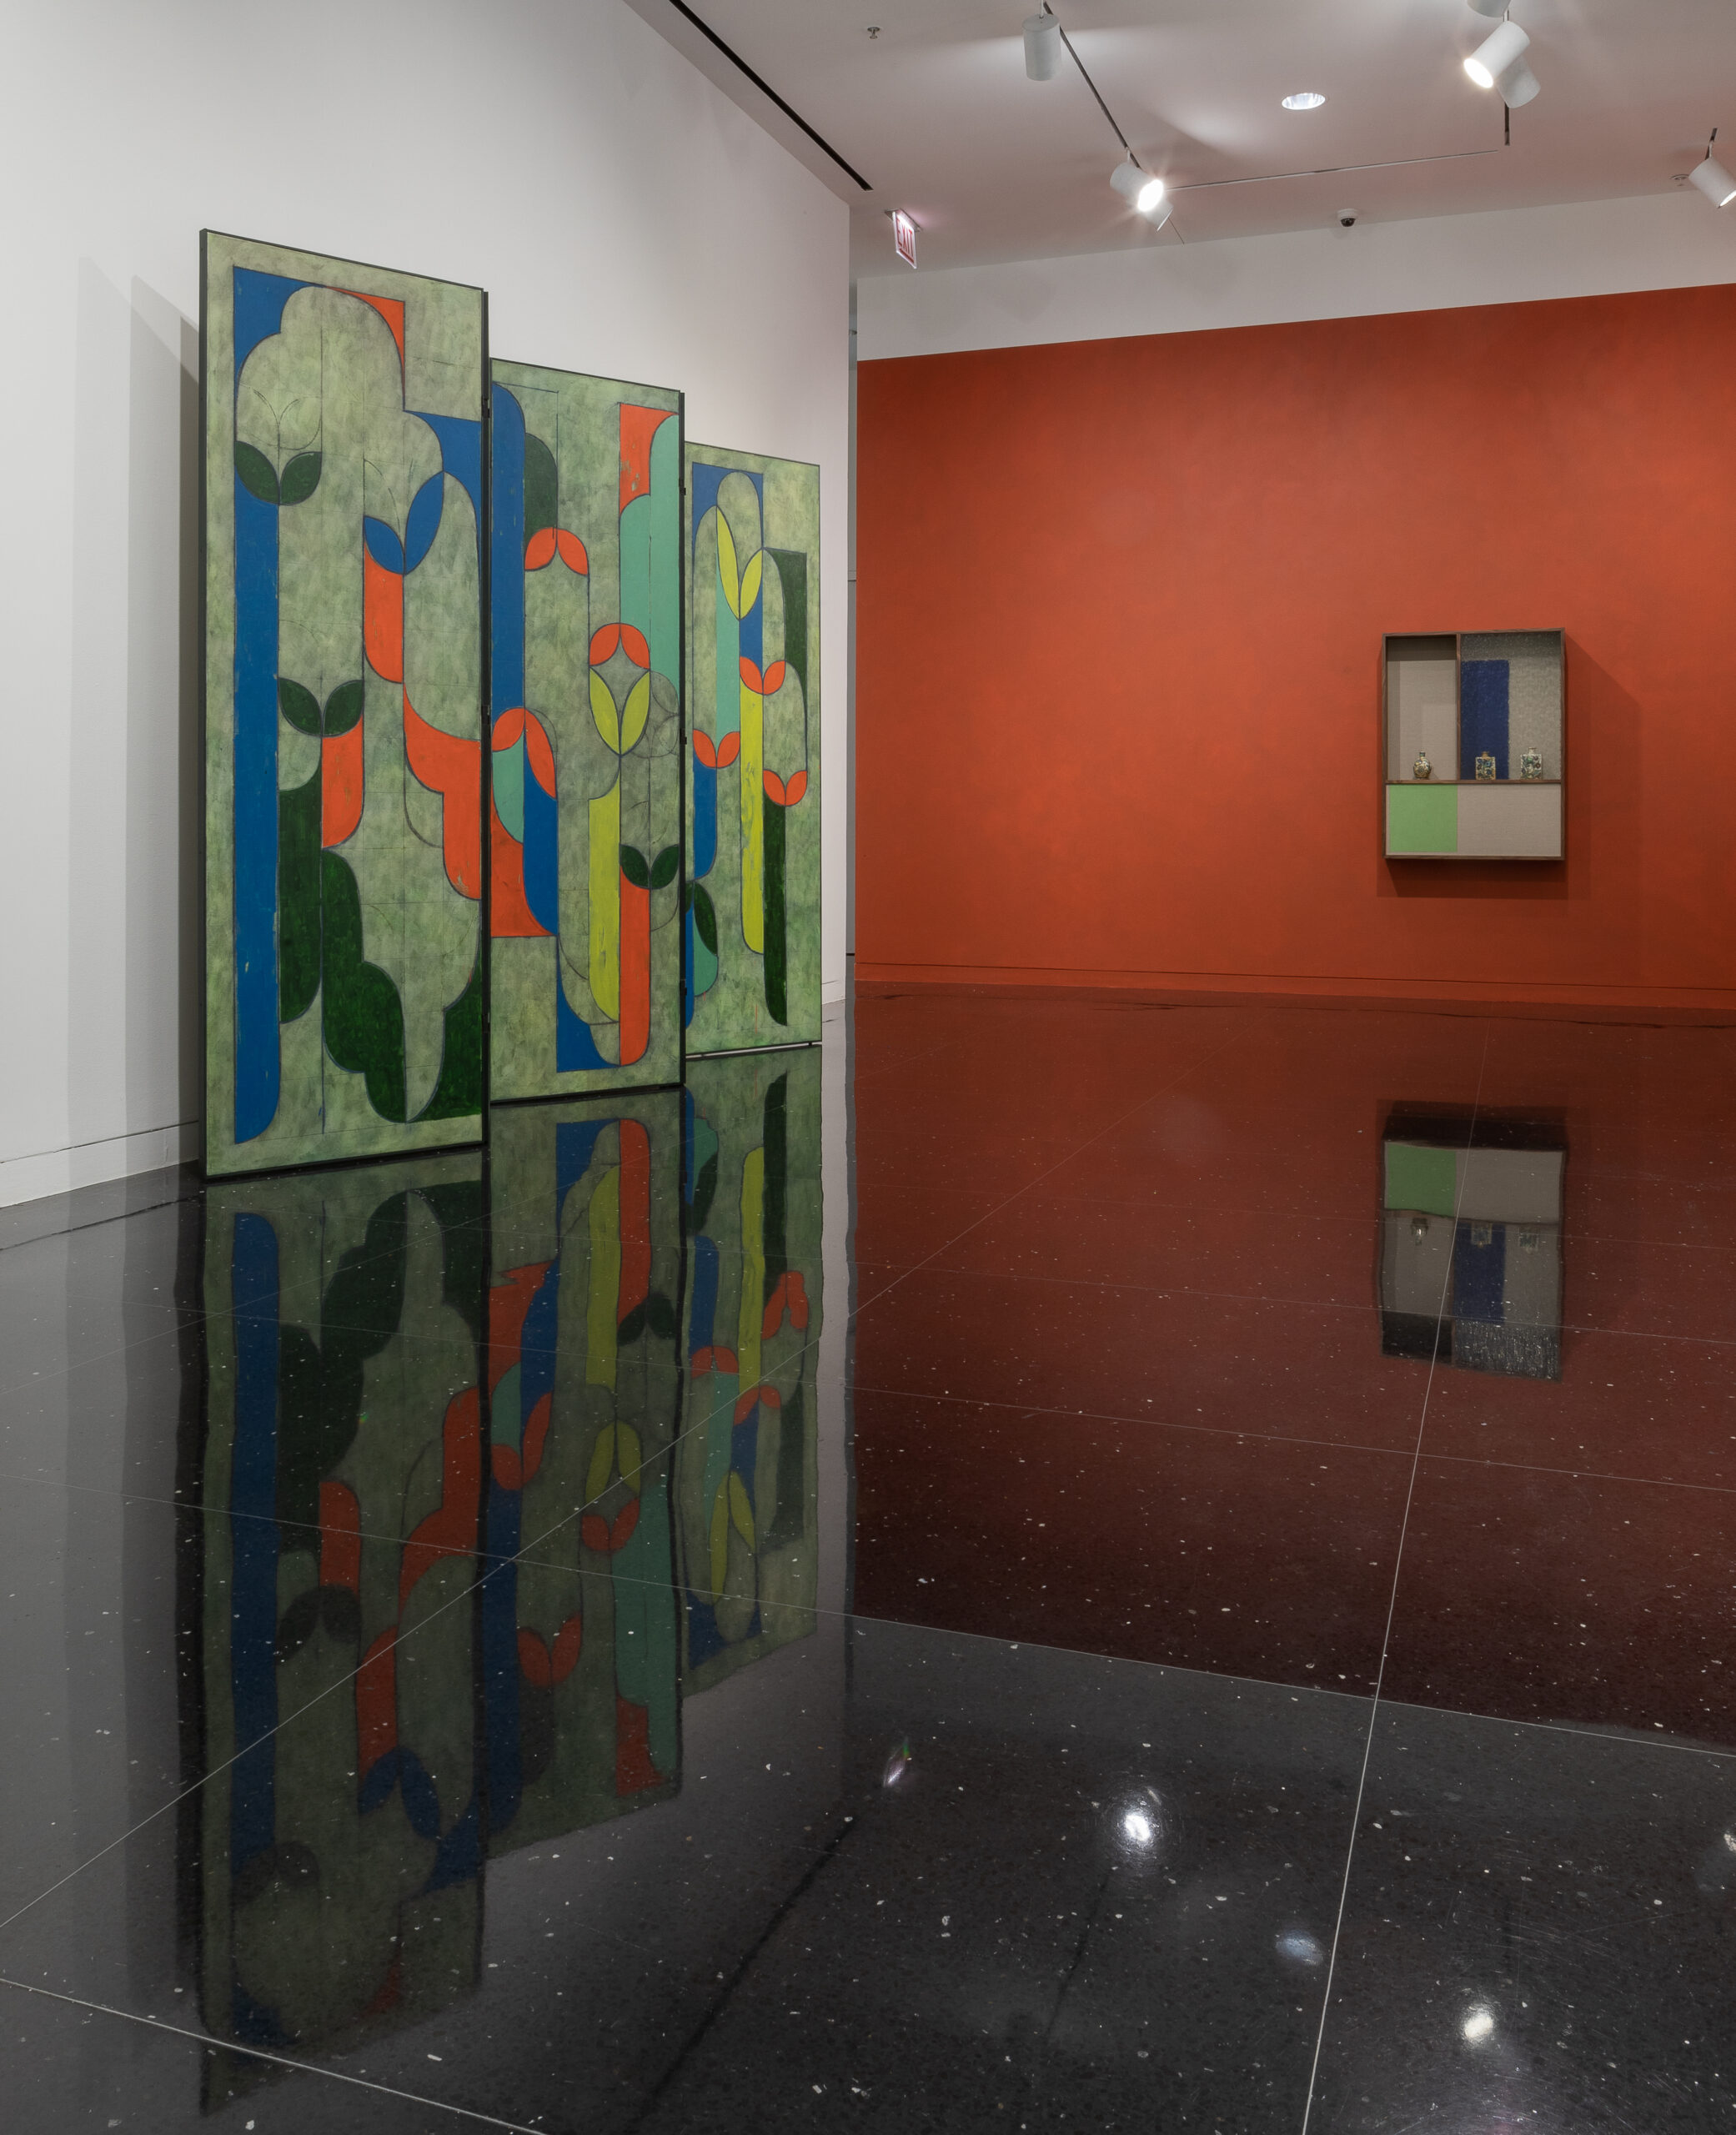 A gallery space with one wall painted a deep orange. To the left of the wall stands a 5-panel screen painted in a green and orange abstract pattern.